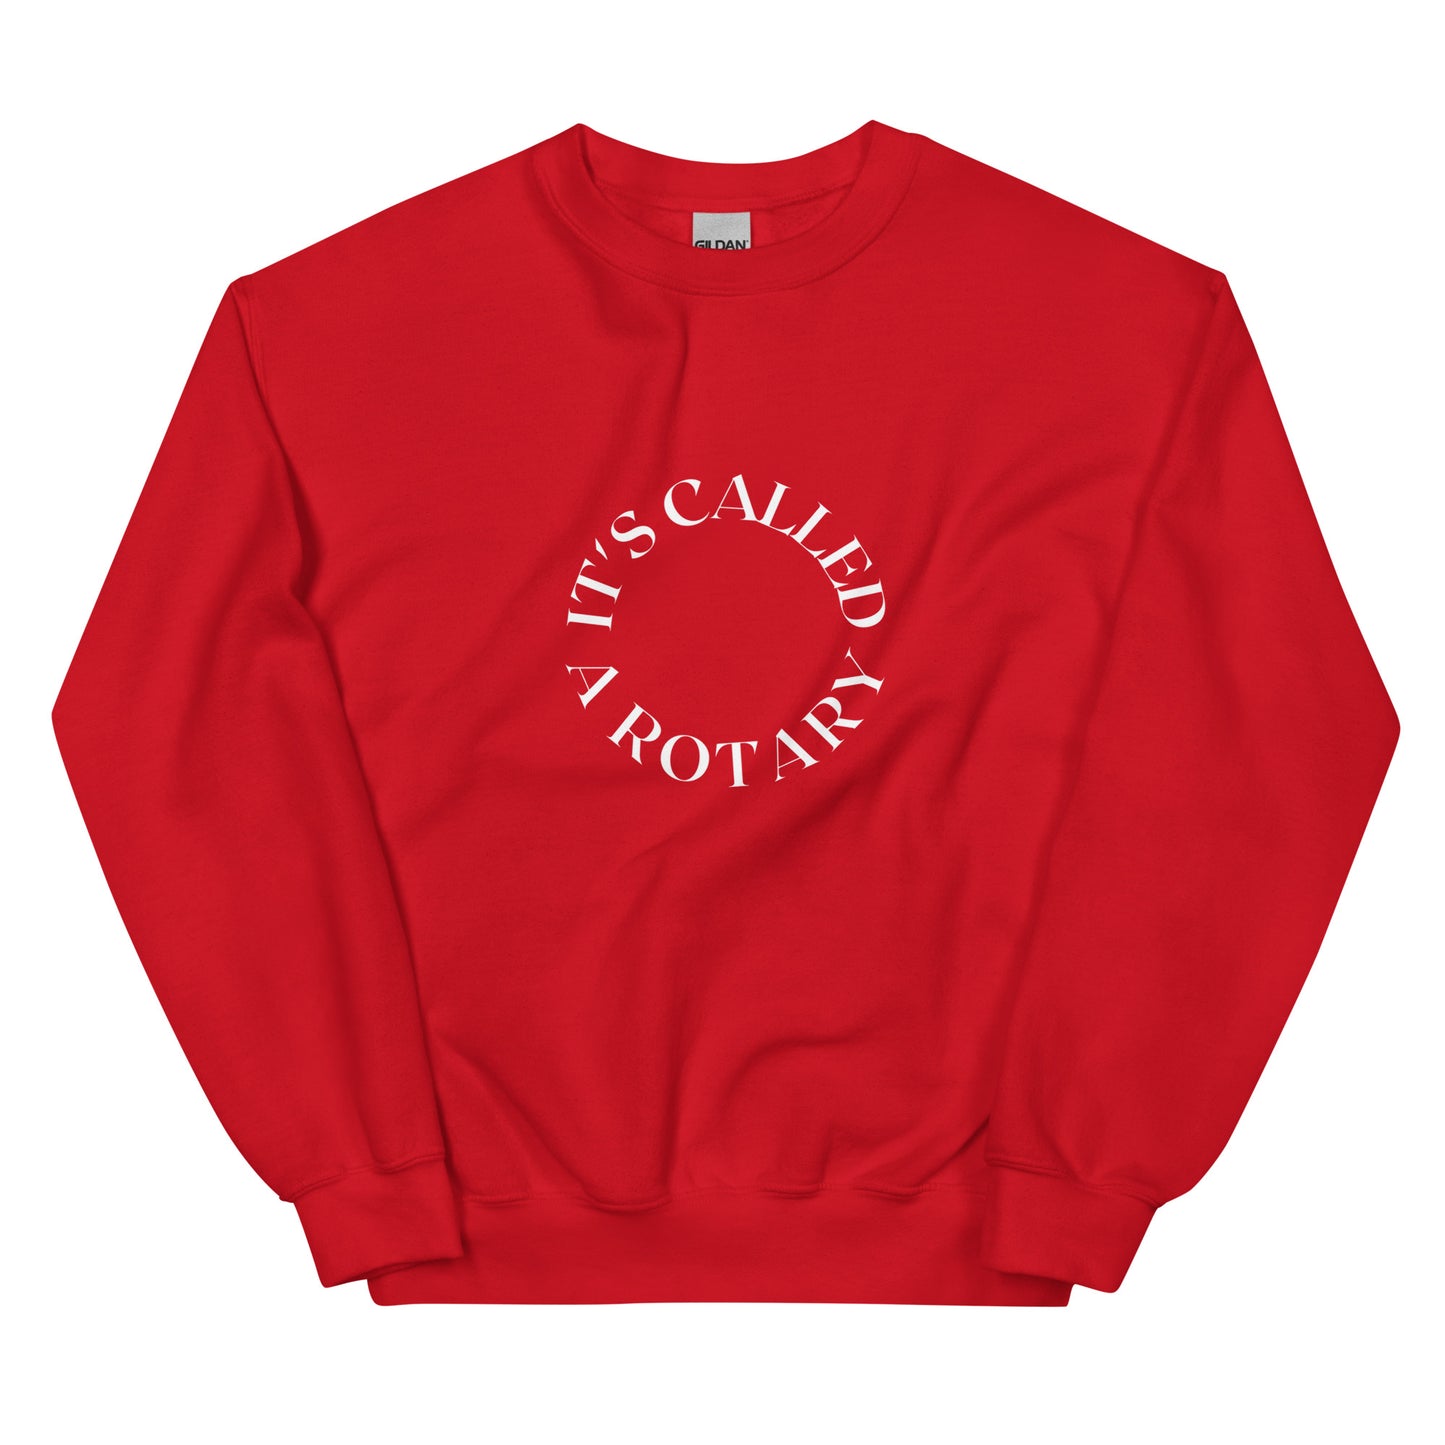 red crewneck that says "it's called a rotary" in white lettering shaped in a circle